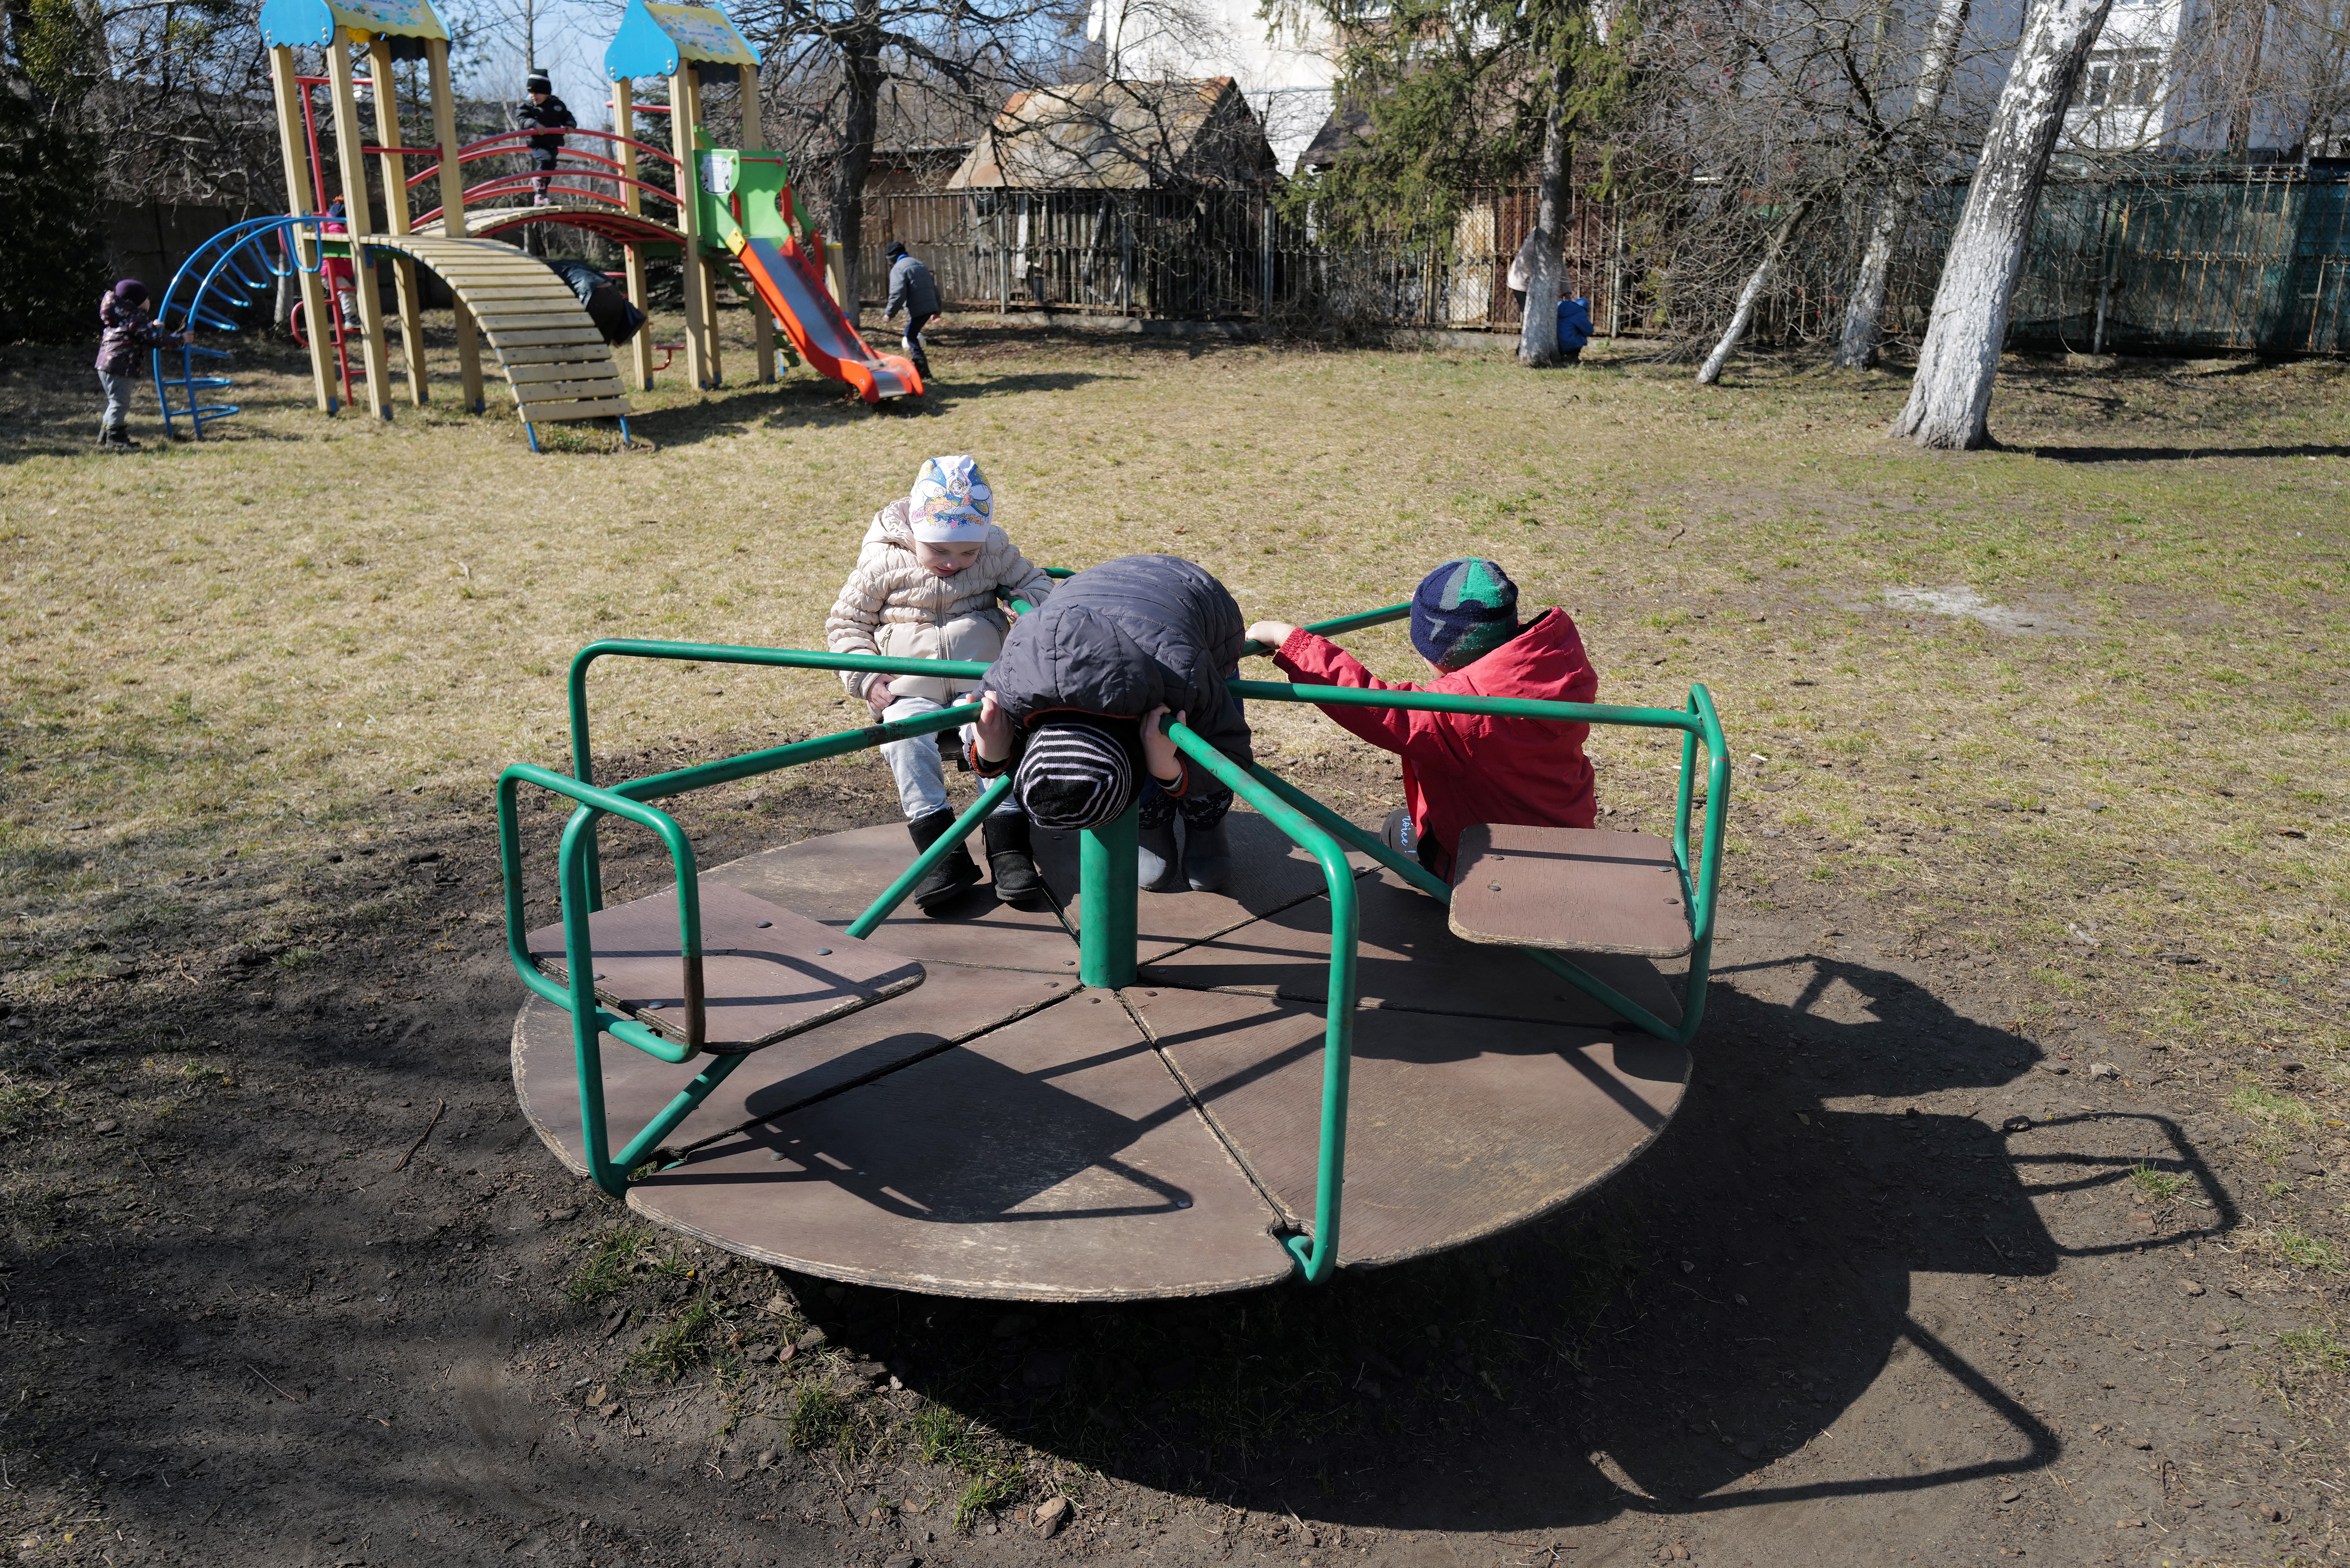 War means tough choices in Ukraine's vast child protection system